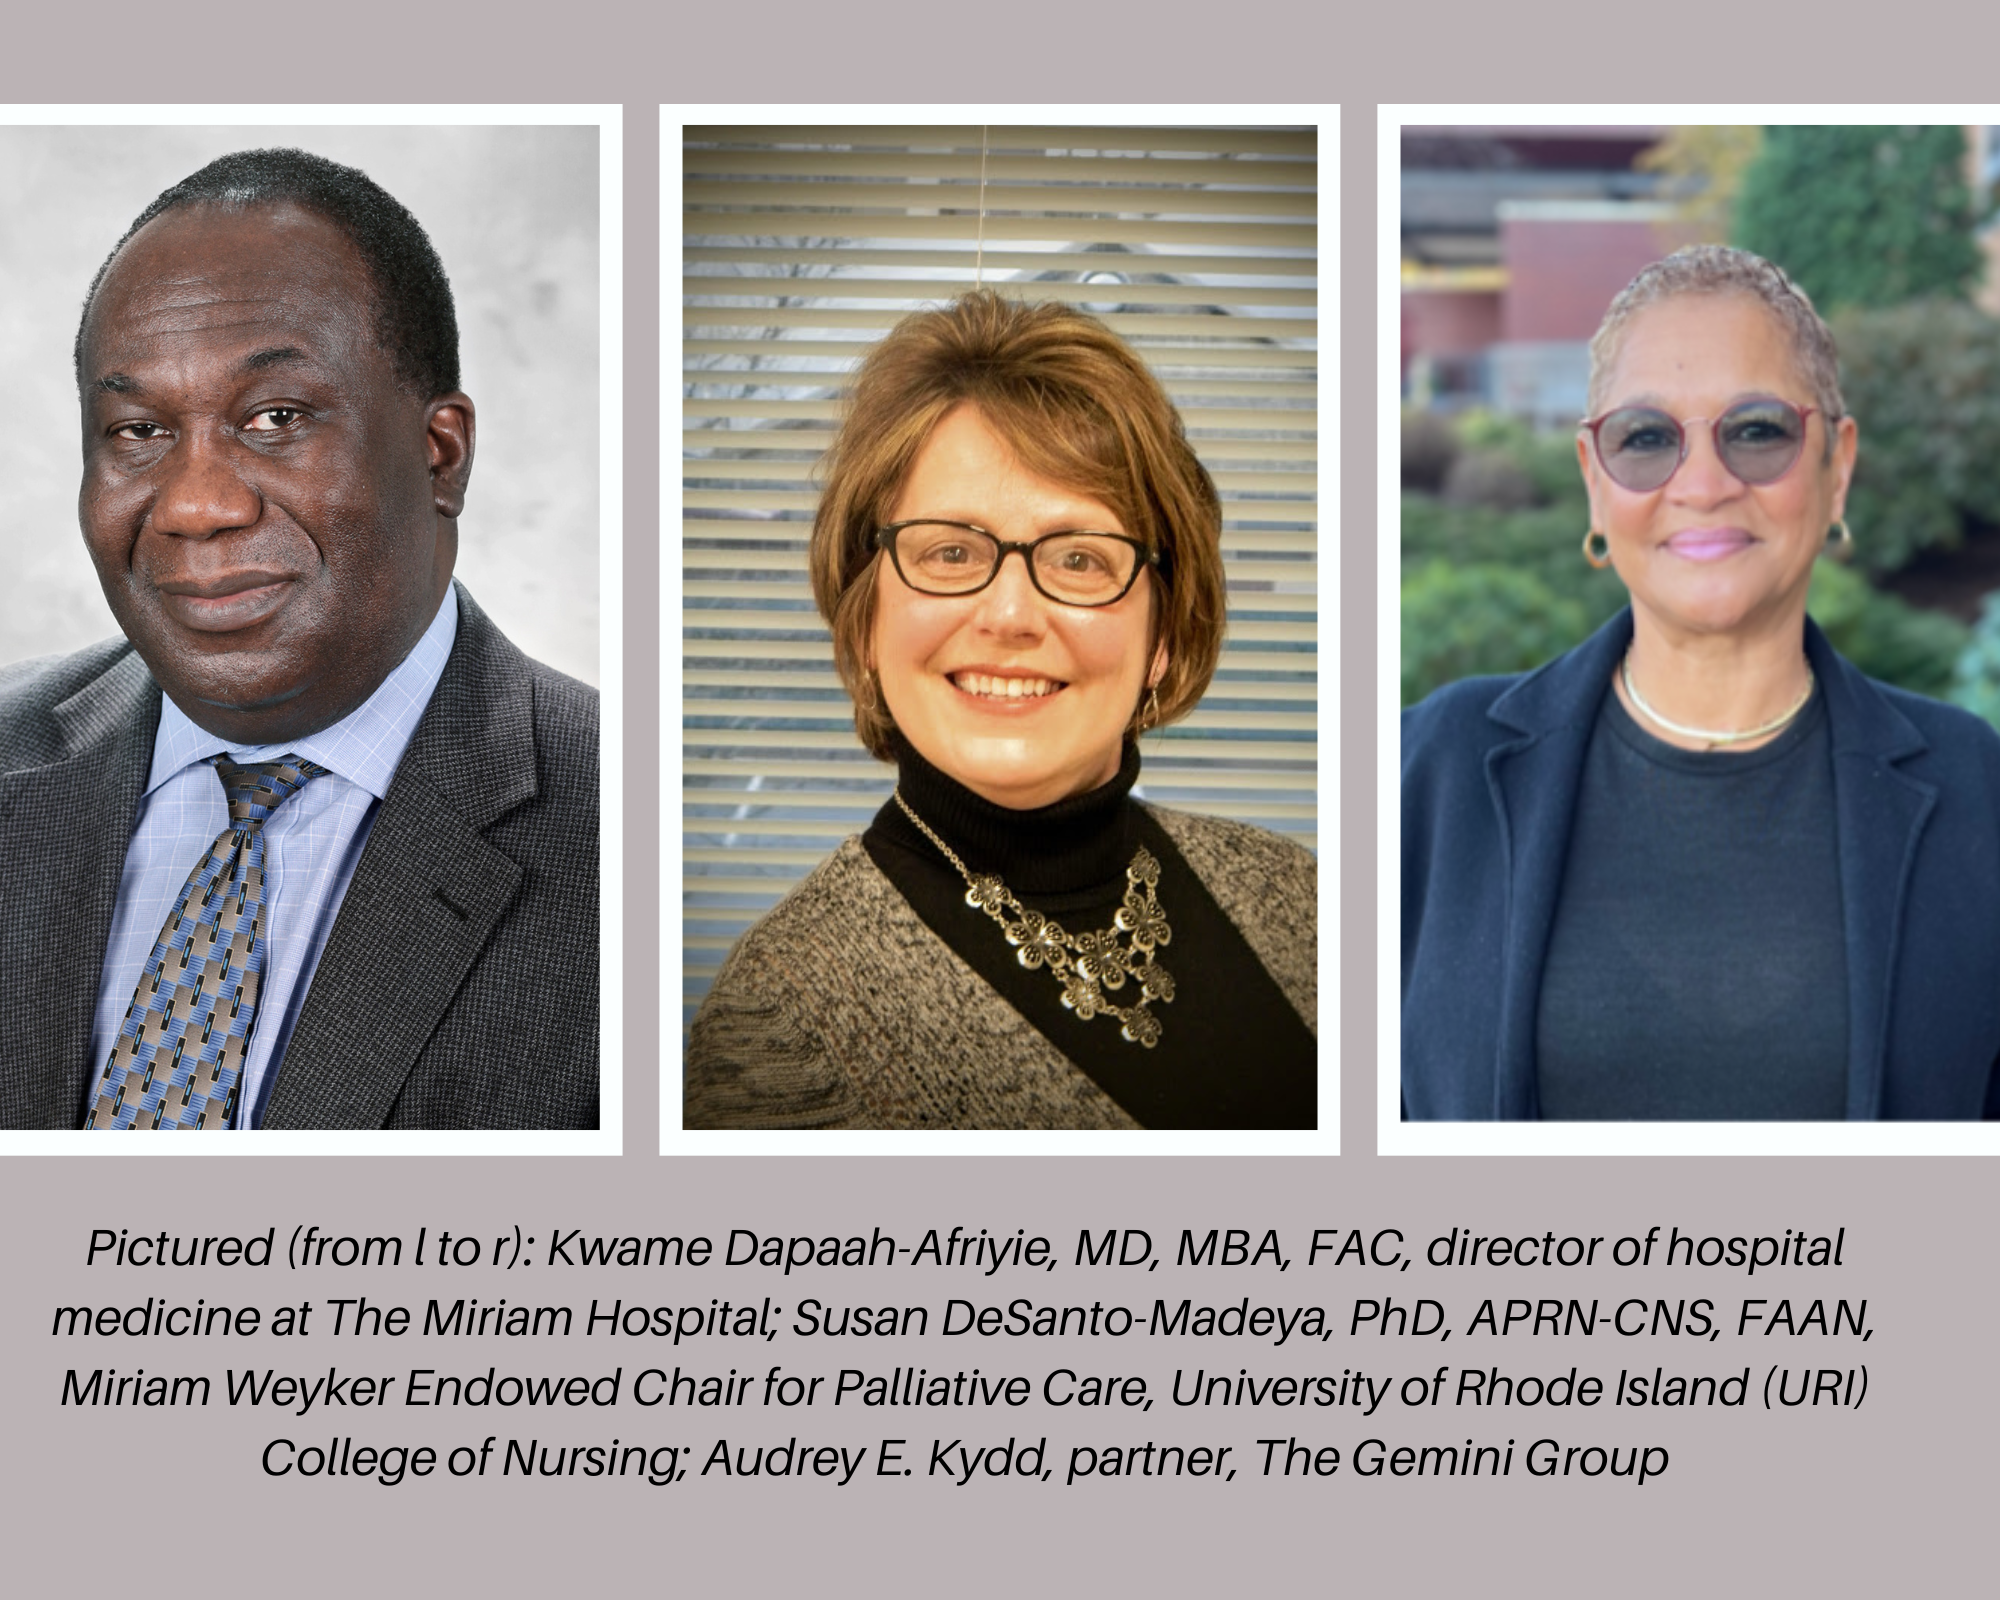 Picture of three new Board members of HopeHealth. Caption Pictured (from l to r): Kwame Dapaah-Afriyie, MD, MBA, FAC, director of hospital medicine at The Miriam Hospital; Susan DeSanto-Madeya, PhD, APRN-CNS, FAAN, Miriam Weyker Endowed Chair for Palliative Care, University of Rhode Island (URI) College of Nursing; Audrey E. Kydd, partner, The Gemini Group